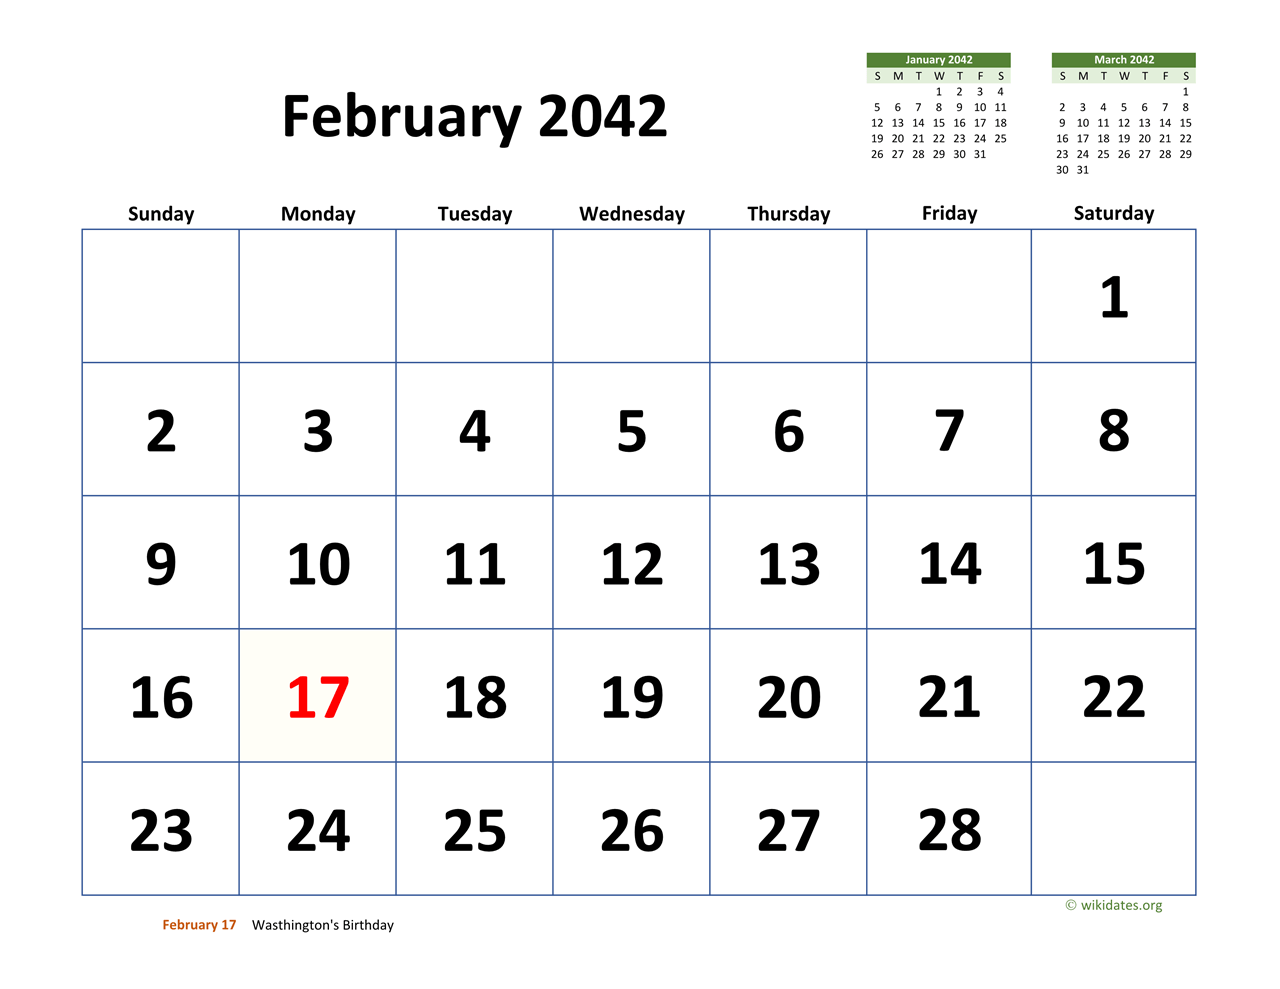 February 2042 Calendar with Extralarge Dates